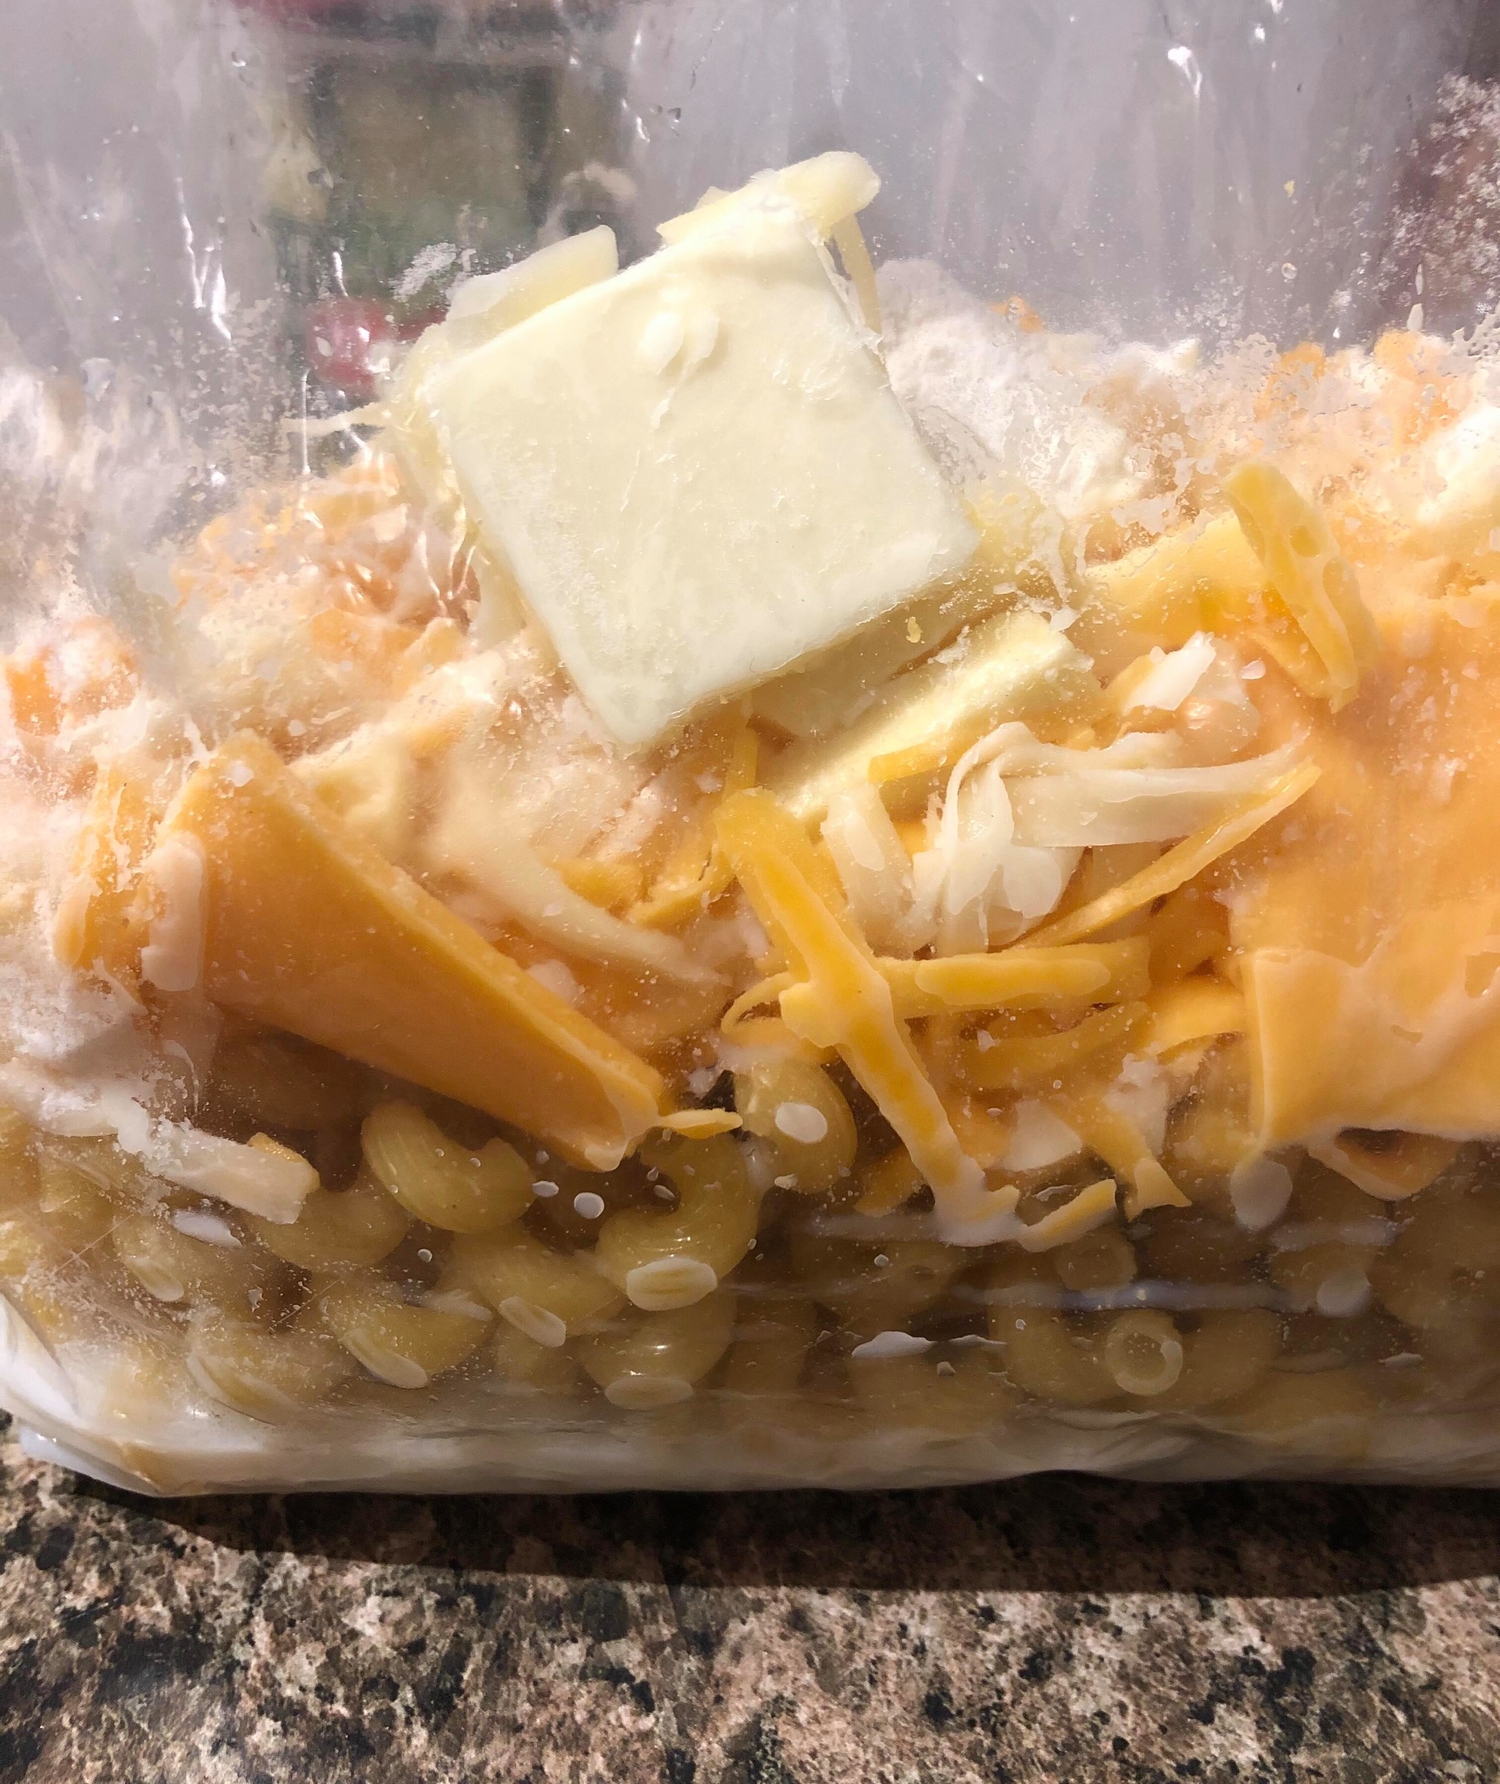 I spent 13 hours trying to make mac and cheese in a bag. It was a disaster.